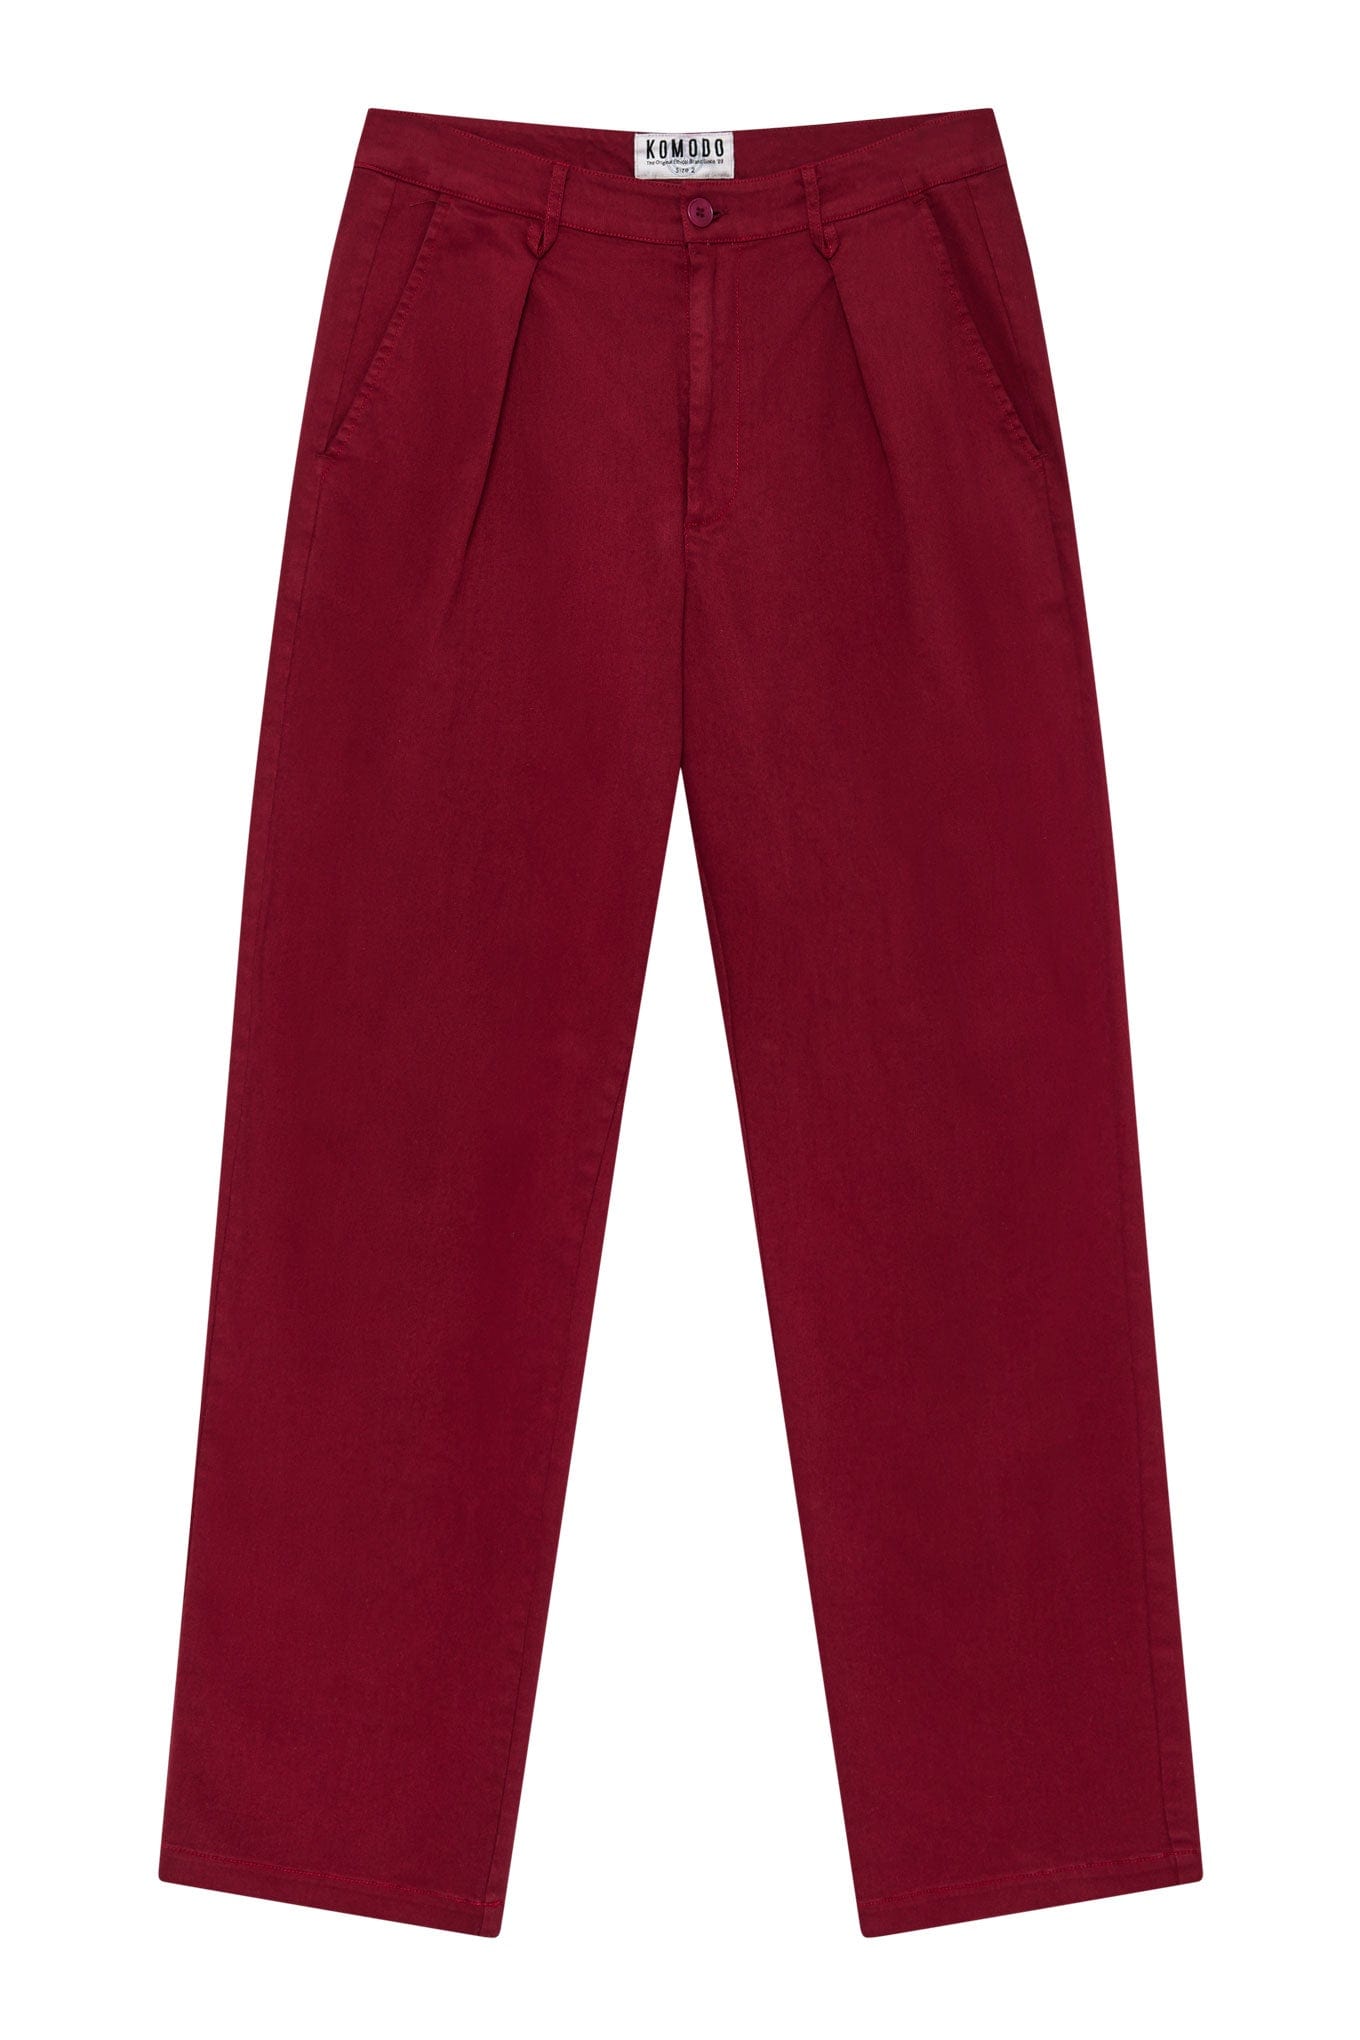 KOMODO BOWIE - Loose Fit Organic Cotton Twill Trouser Wine Red